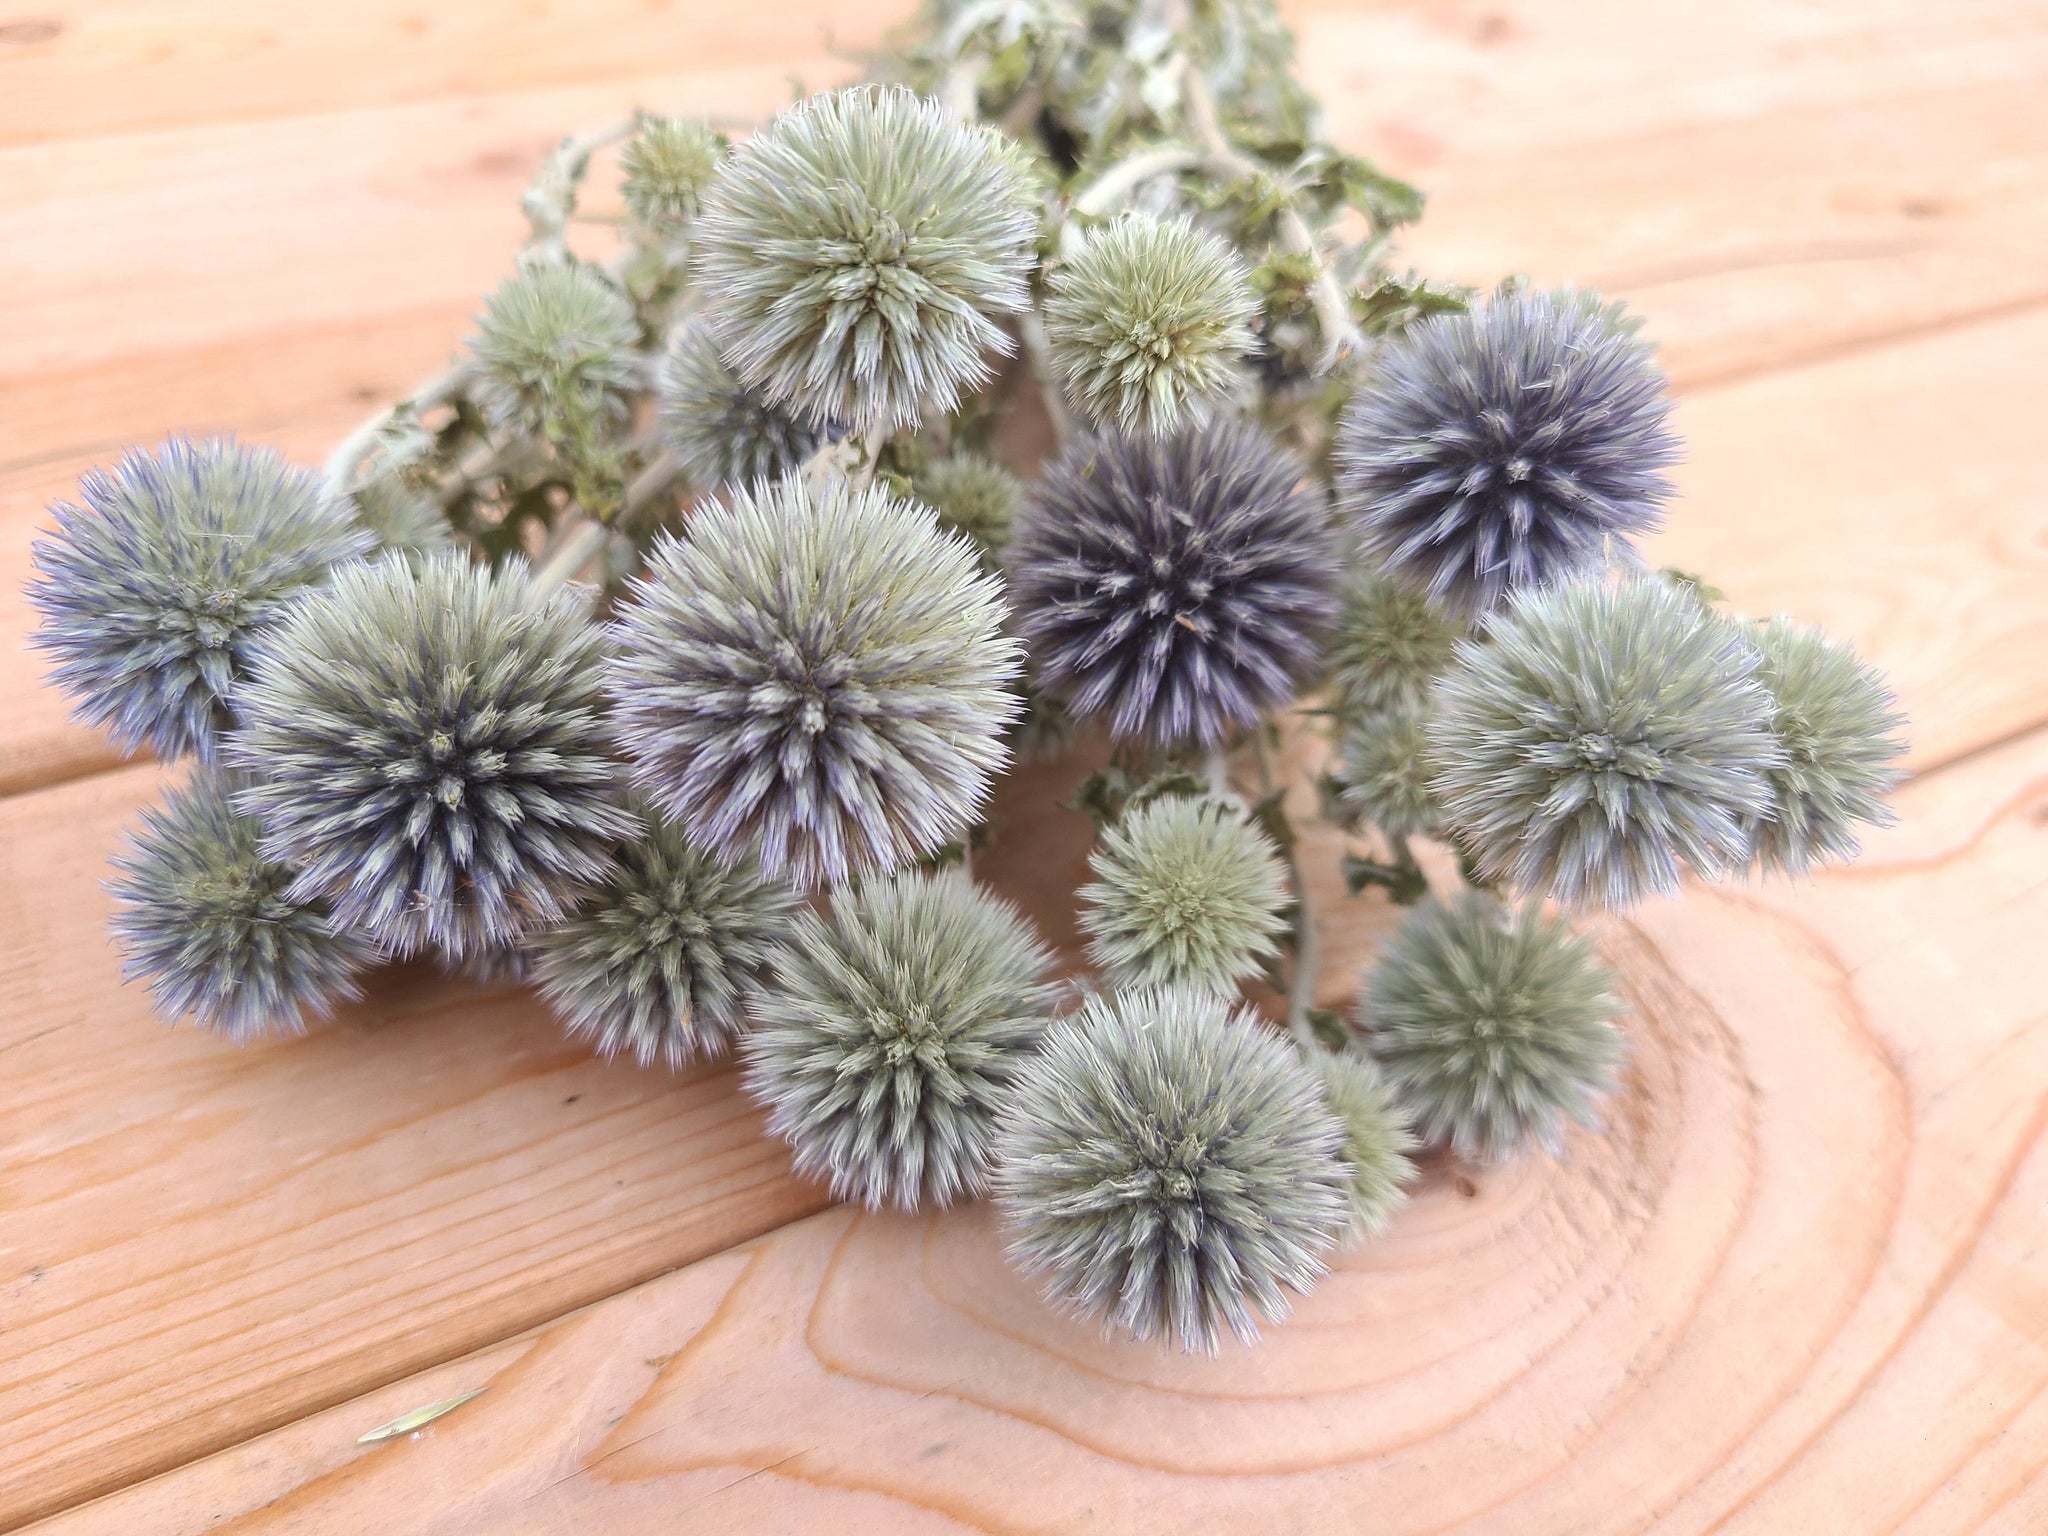 Blue Echinops  Dried and Dyed Filler - Oh! You're Lovely - Sola